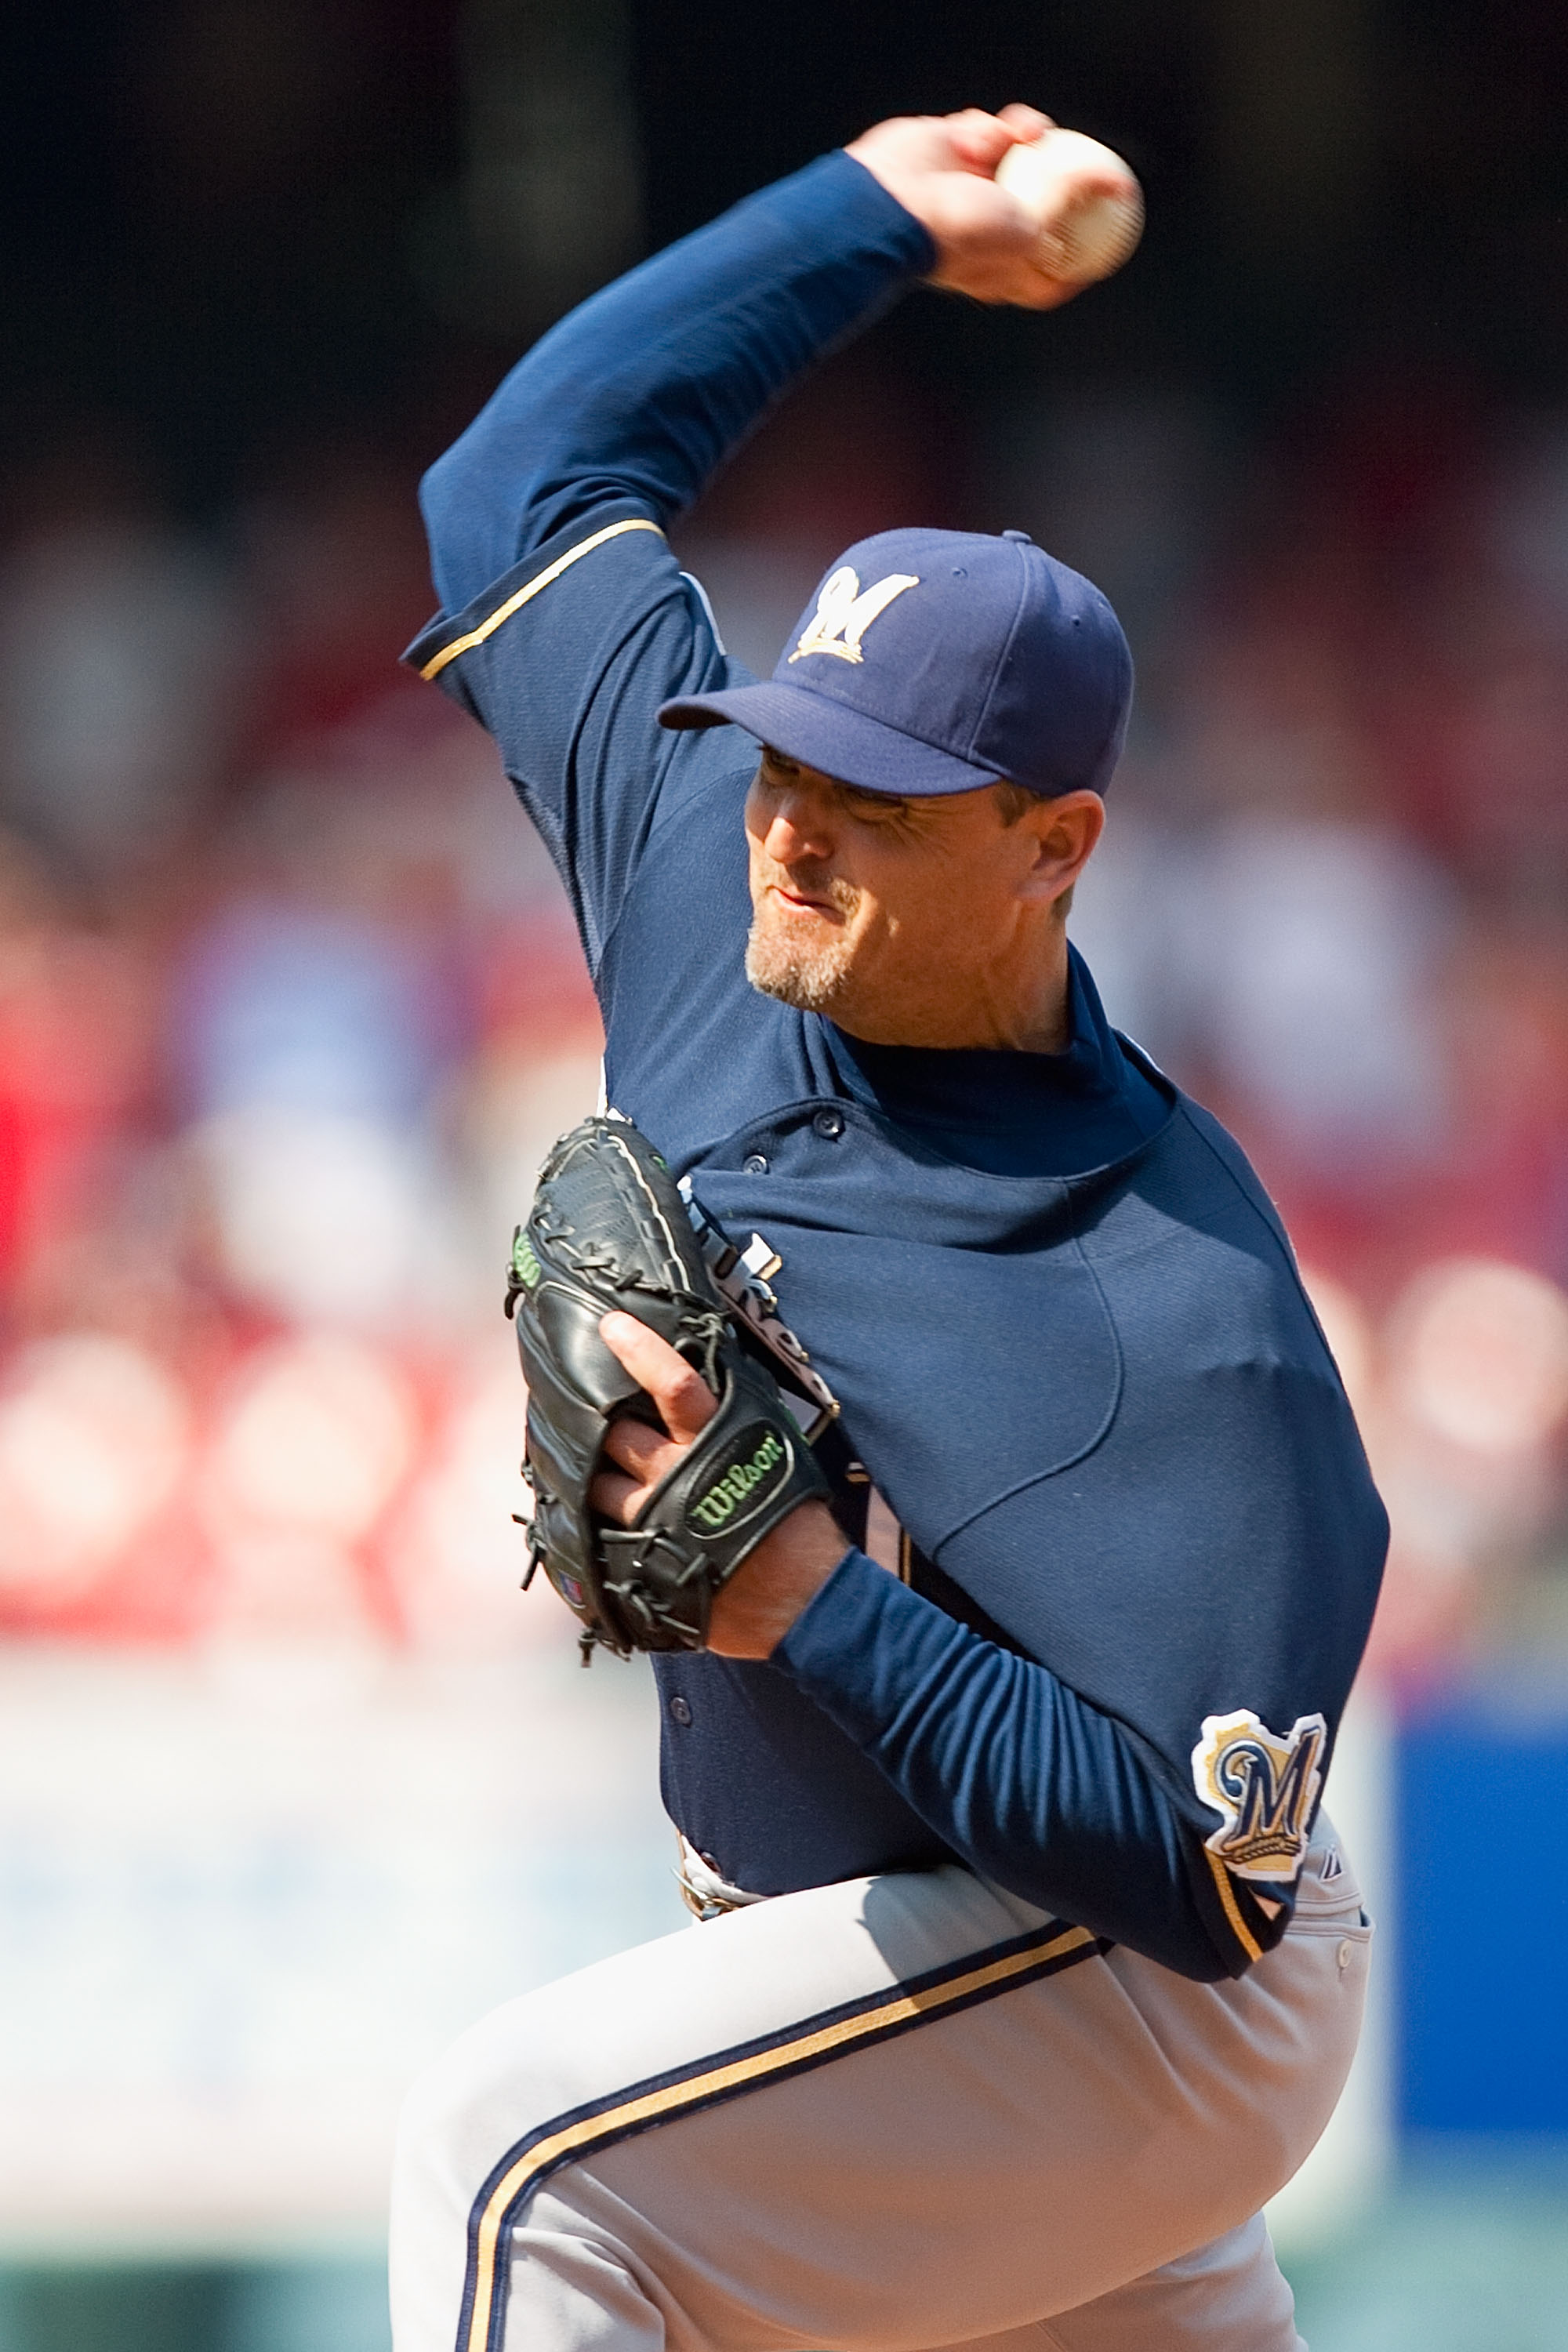 Trevor Hoffman's Place in the Top 10 Greatest Closers in MLB